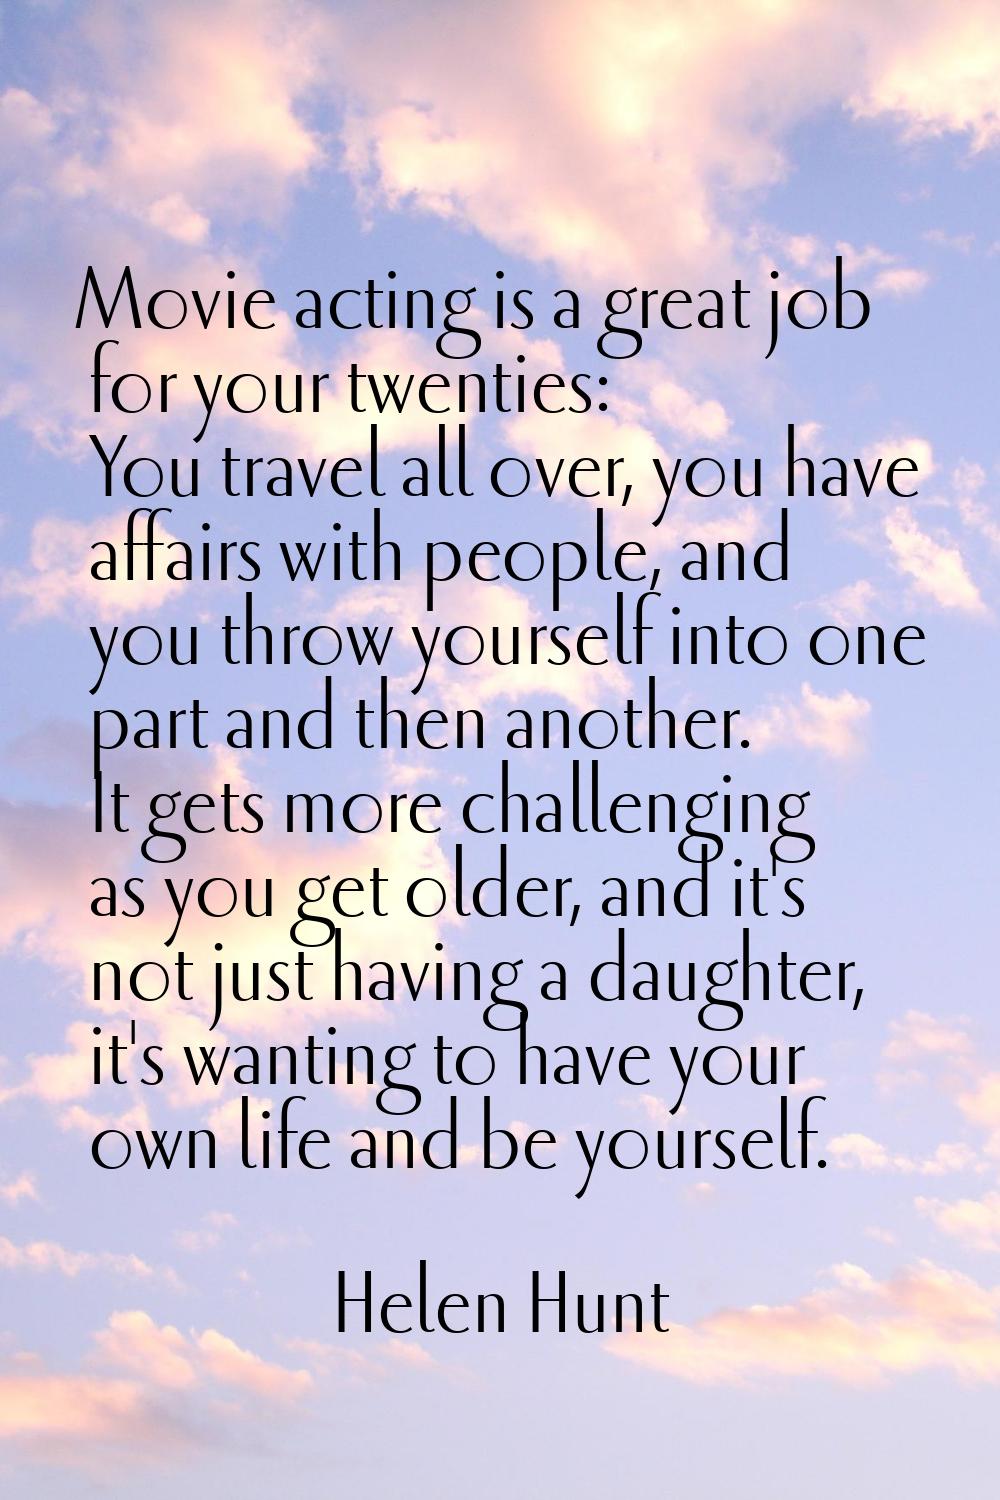 Movie acting is a great job for your twenties: You travel all over, you have affairs with people, a